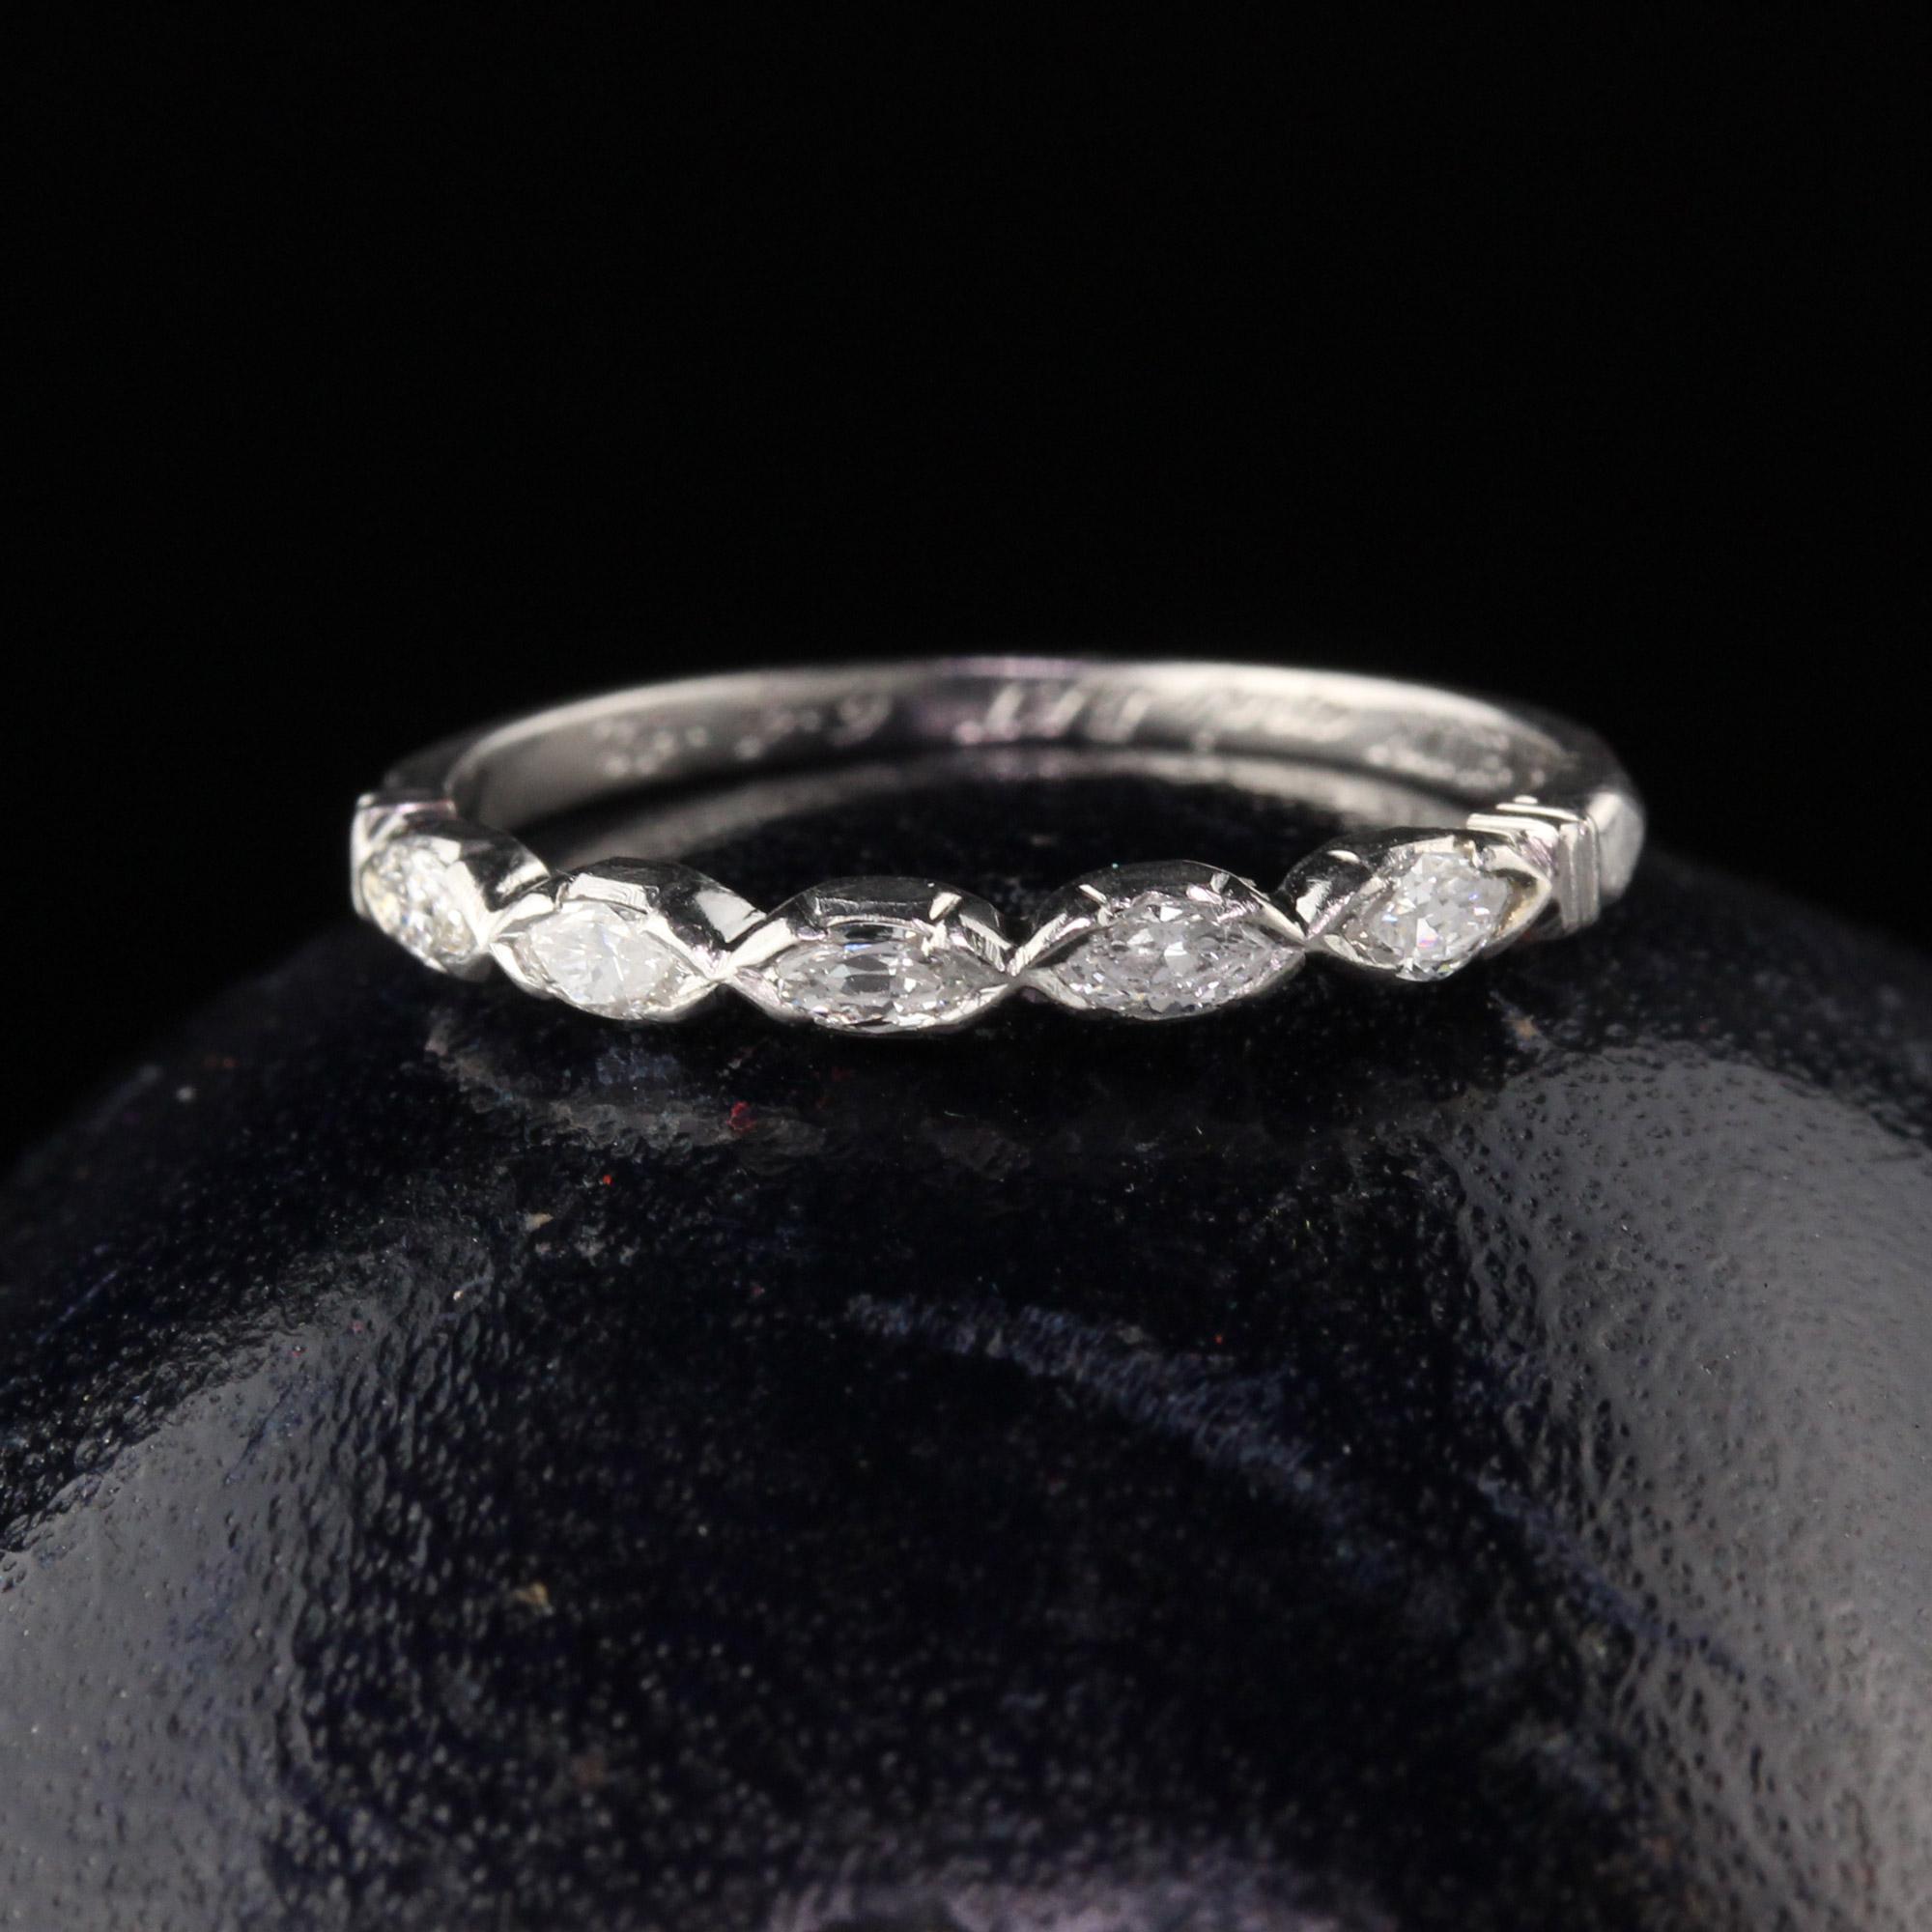 Circa 1942! Vintage Platinum half eternity band with 5 old marquise cut diamonds. 

#R0343

Metal: Platinum

Weight: 1.9 Grams

Total Diamond Weight: Approximately 0.20 cts single cut diamonds

Diamond Color: H

Diamond Clarity: SI1

Ring Size: 5